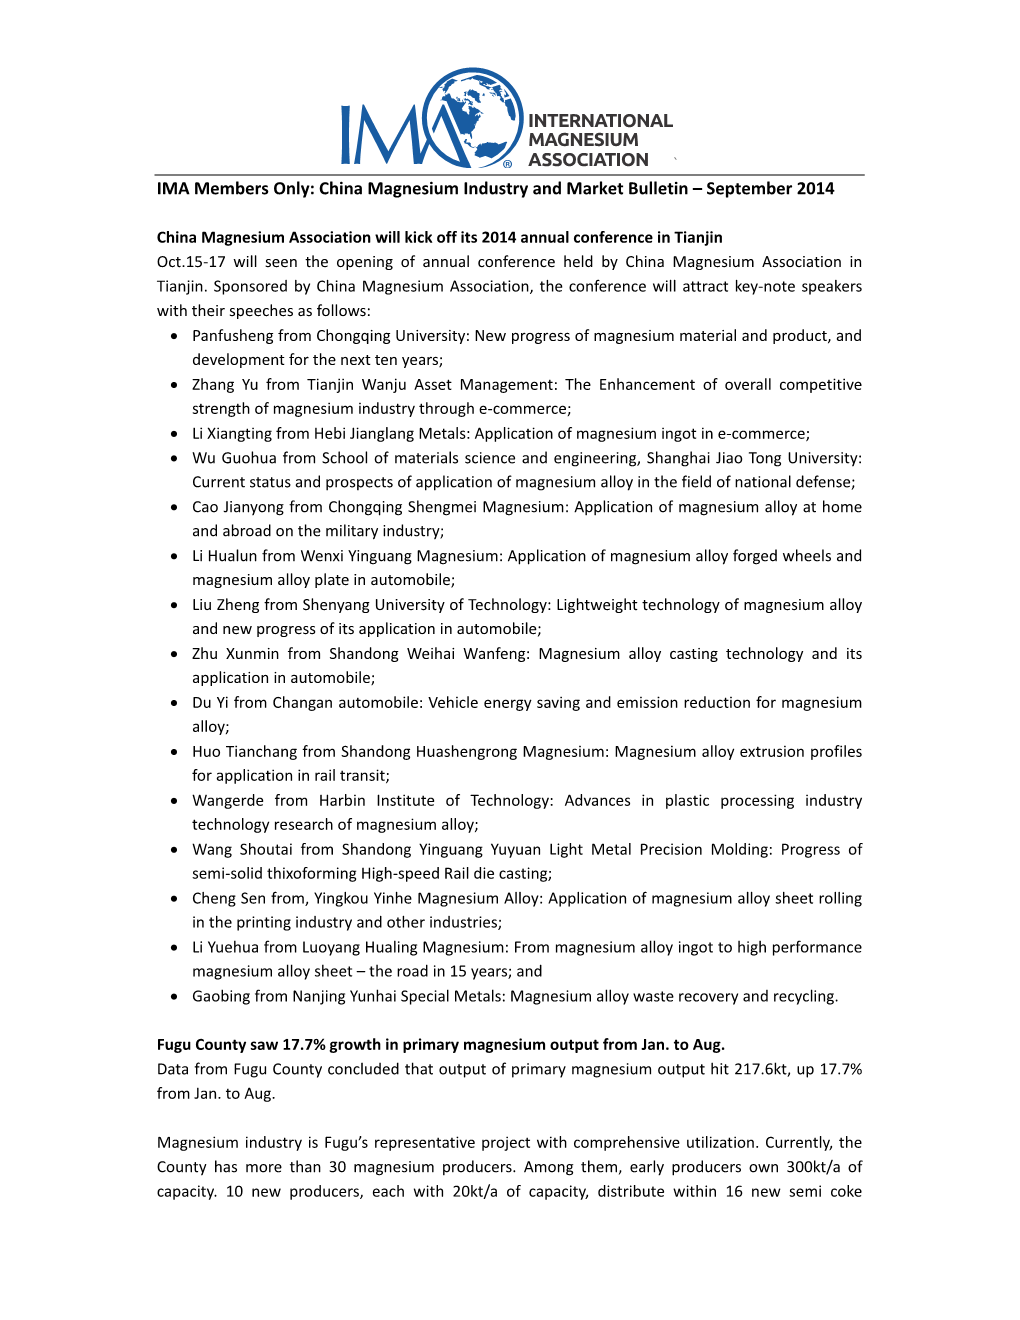 IMA Members Only: China Magnesium Industry and Market Bulletin – September 2014